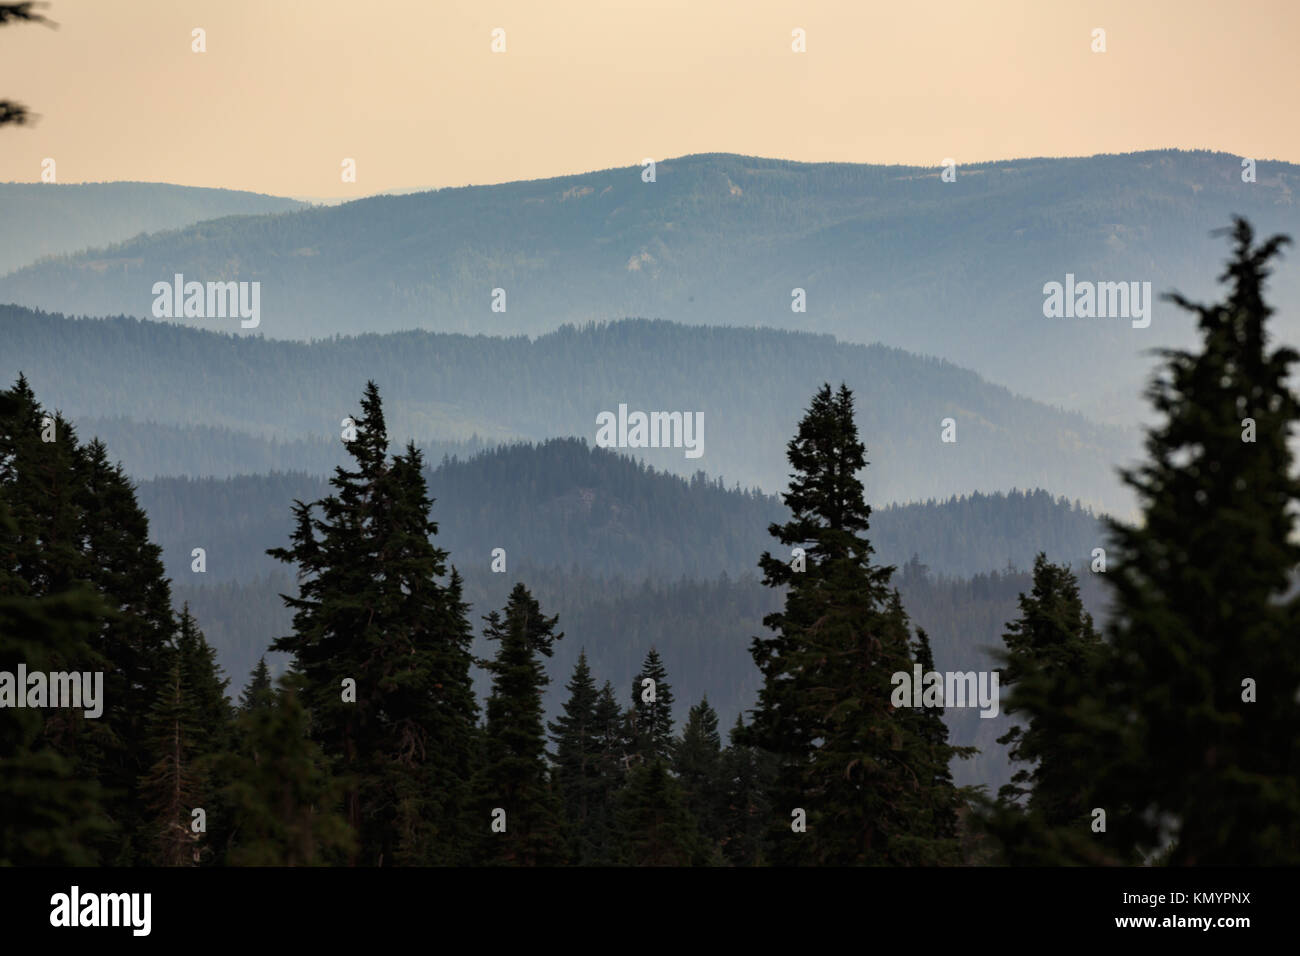 Peaceful, beautiful view of Cascade Mountain range framed by pine trees at sunset Stock Photo